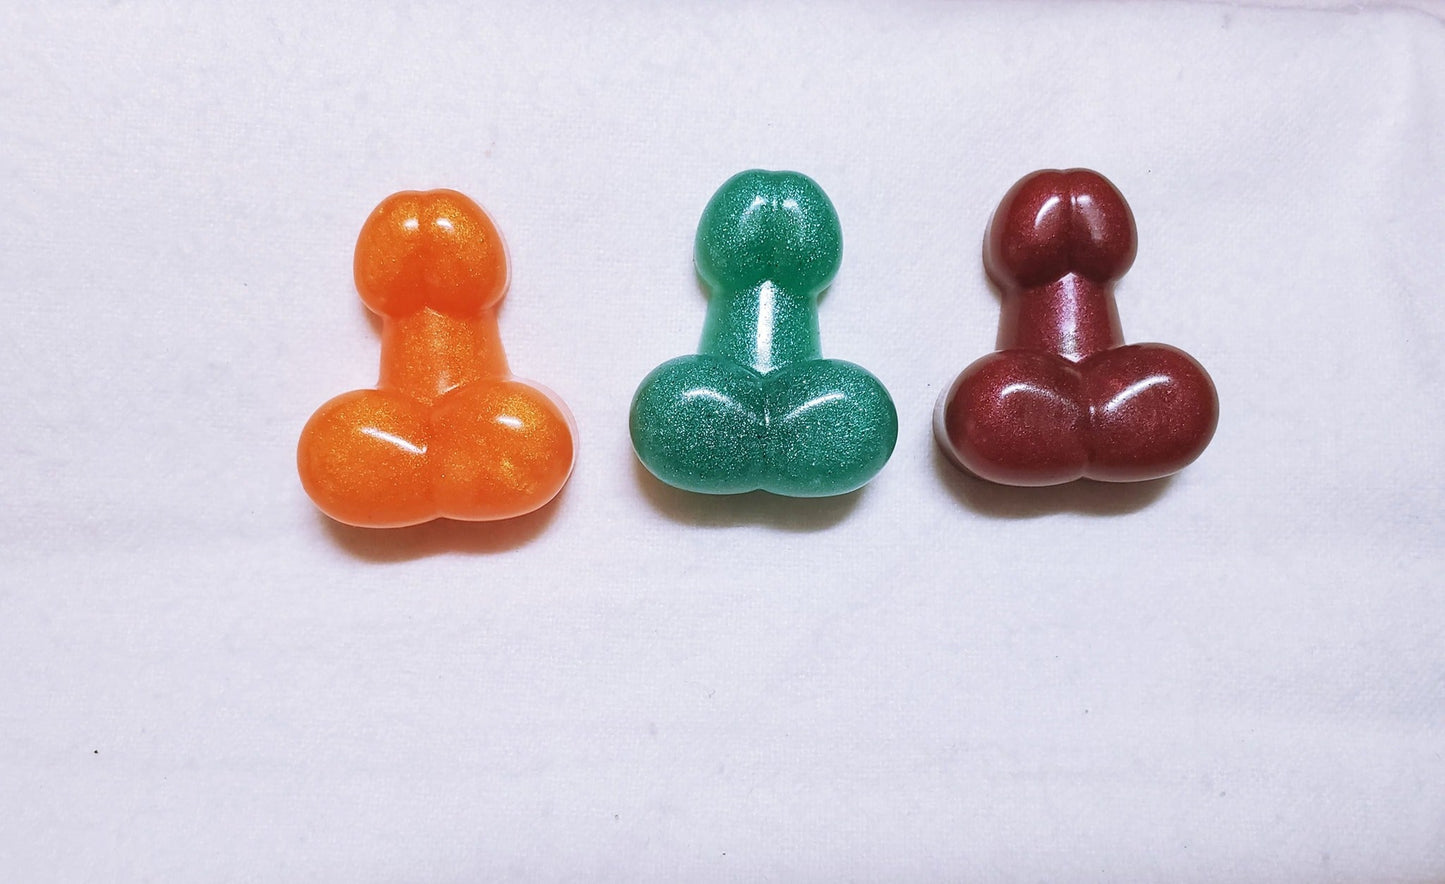 JELLY Soap | Tiny Bag of Dicks | Price is for ONE piece | Tiny Penis Shape | 1.41 in x 1.14 in | Gag Gift | Multi Use Soap